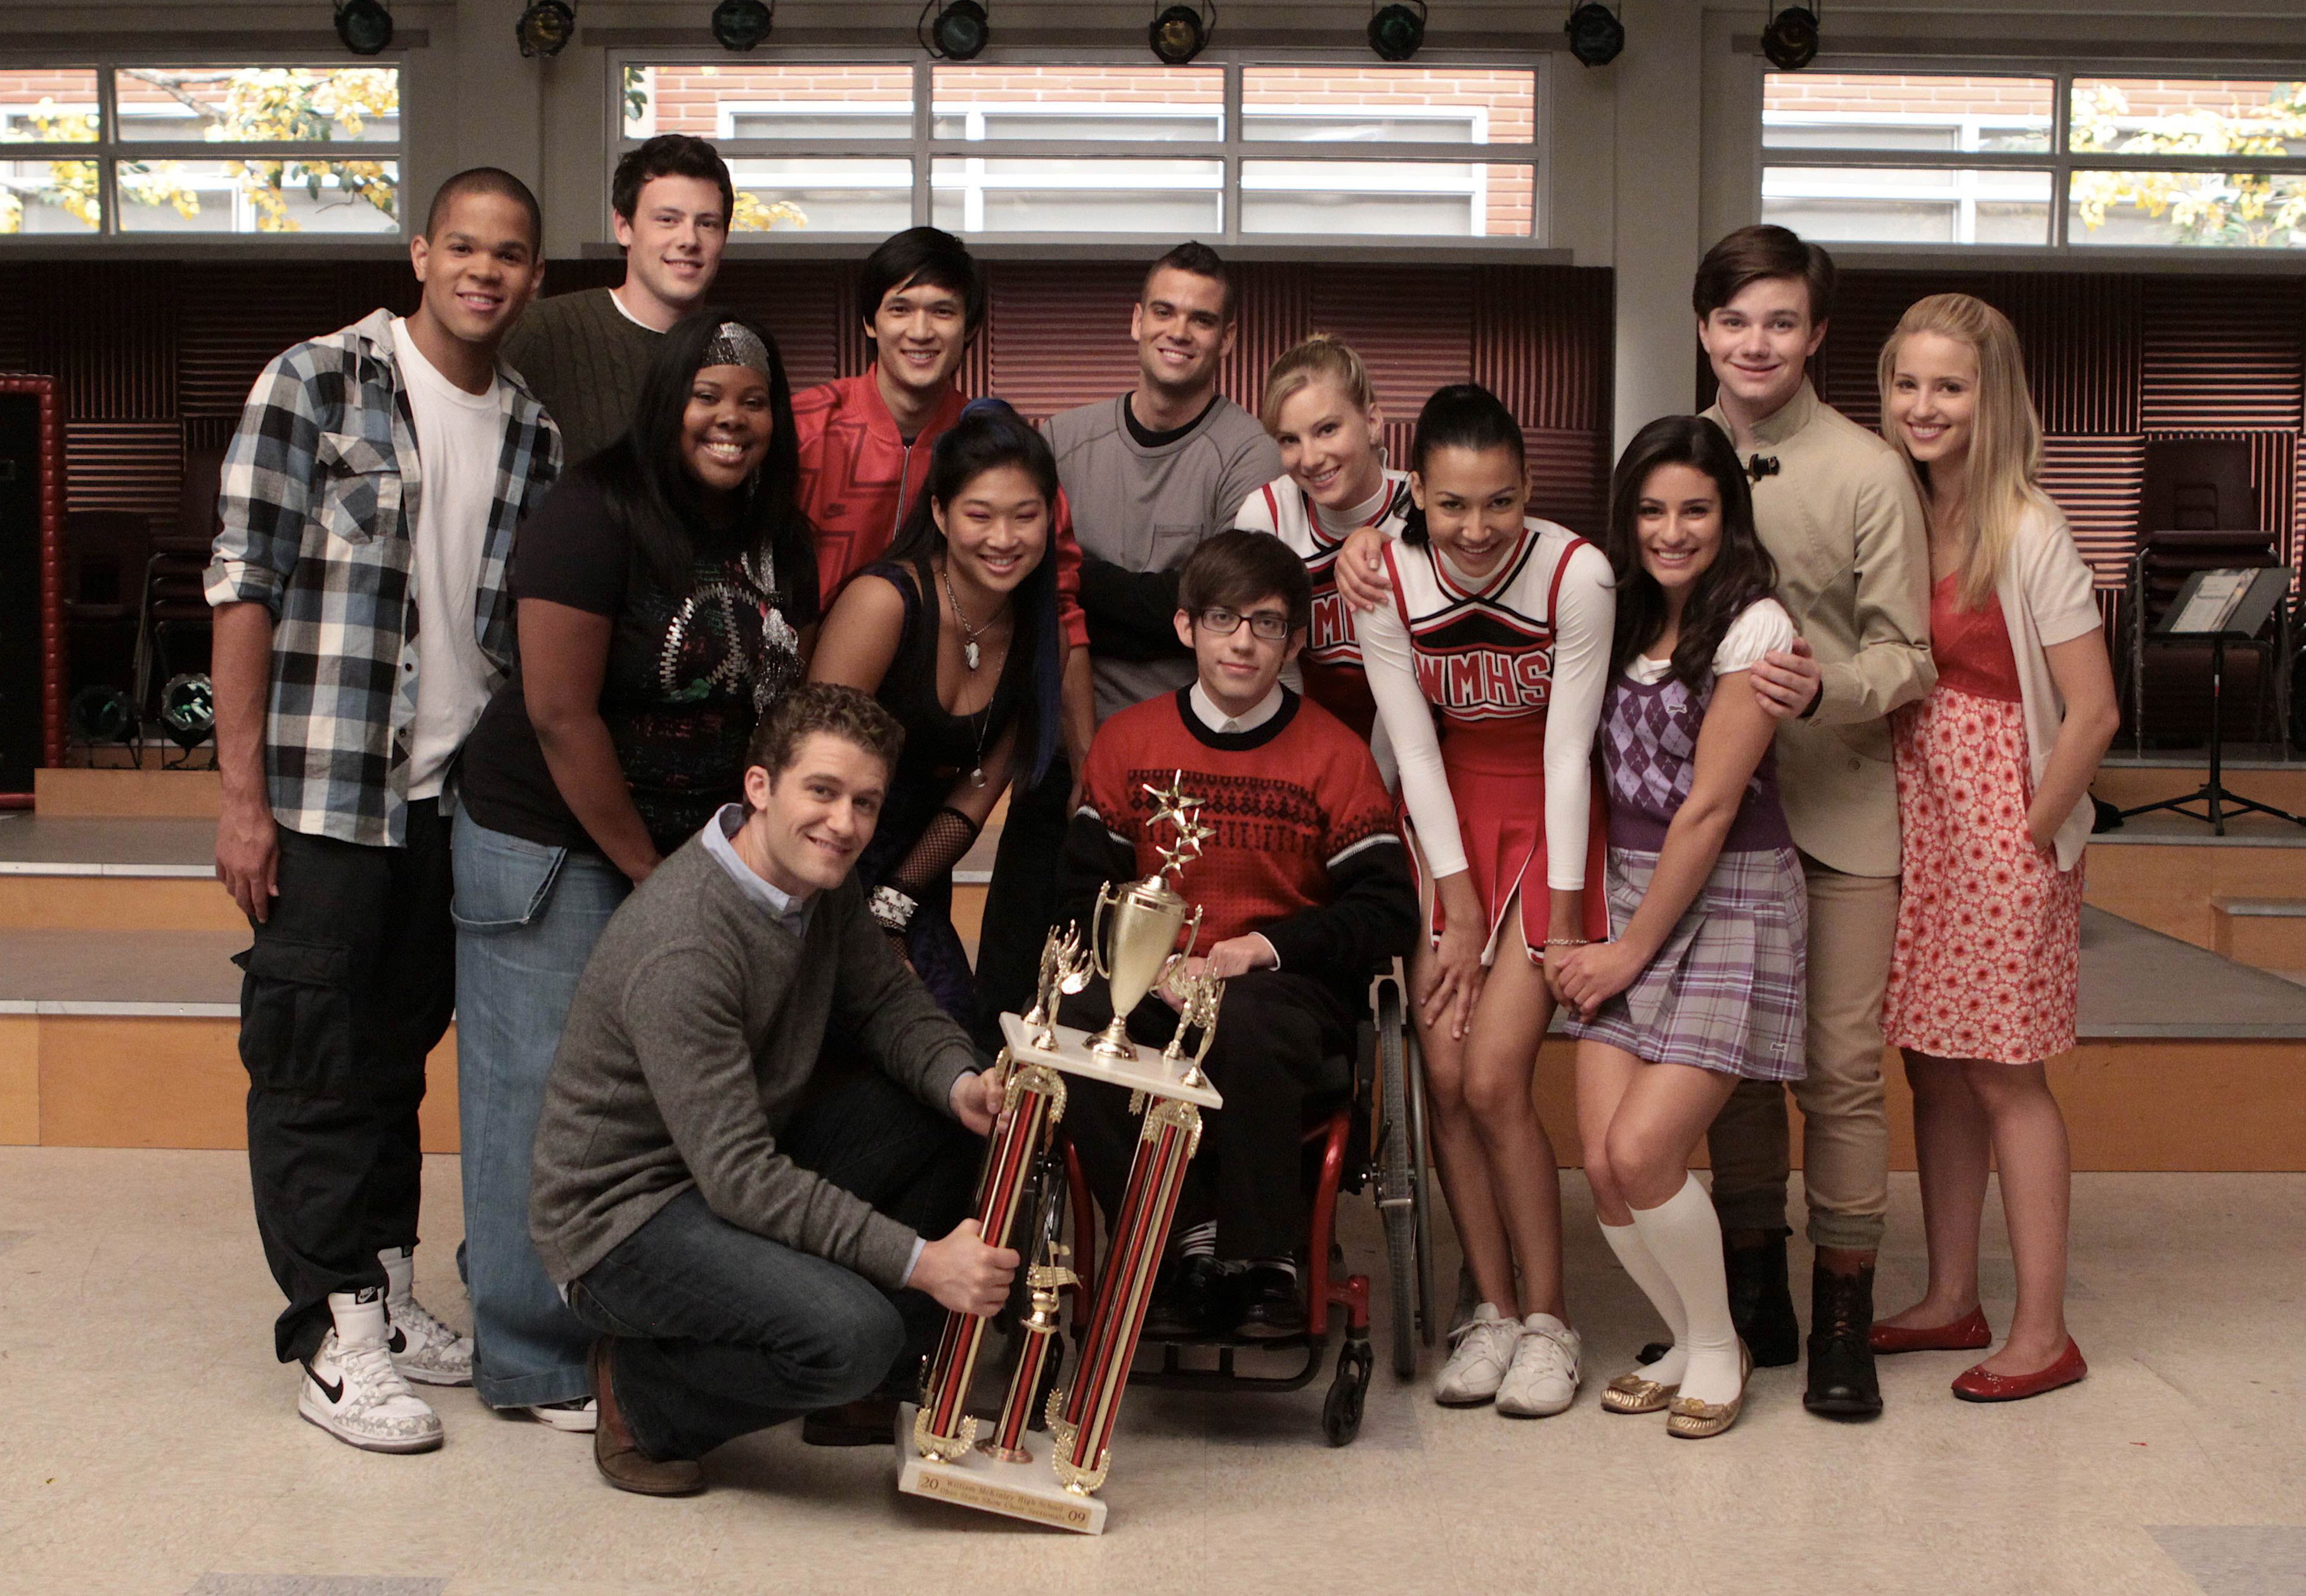 ‘Glee’ 15th Anniversary: Looking Back at a Cultural Moment Never to Be Repeated